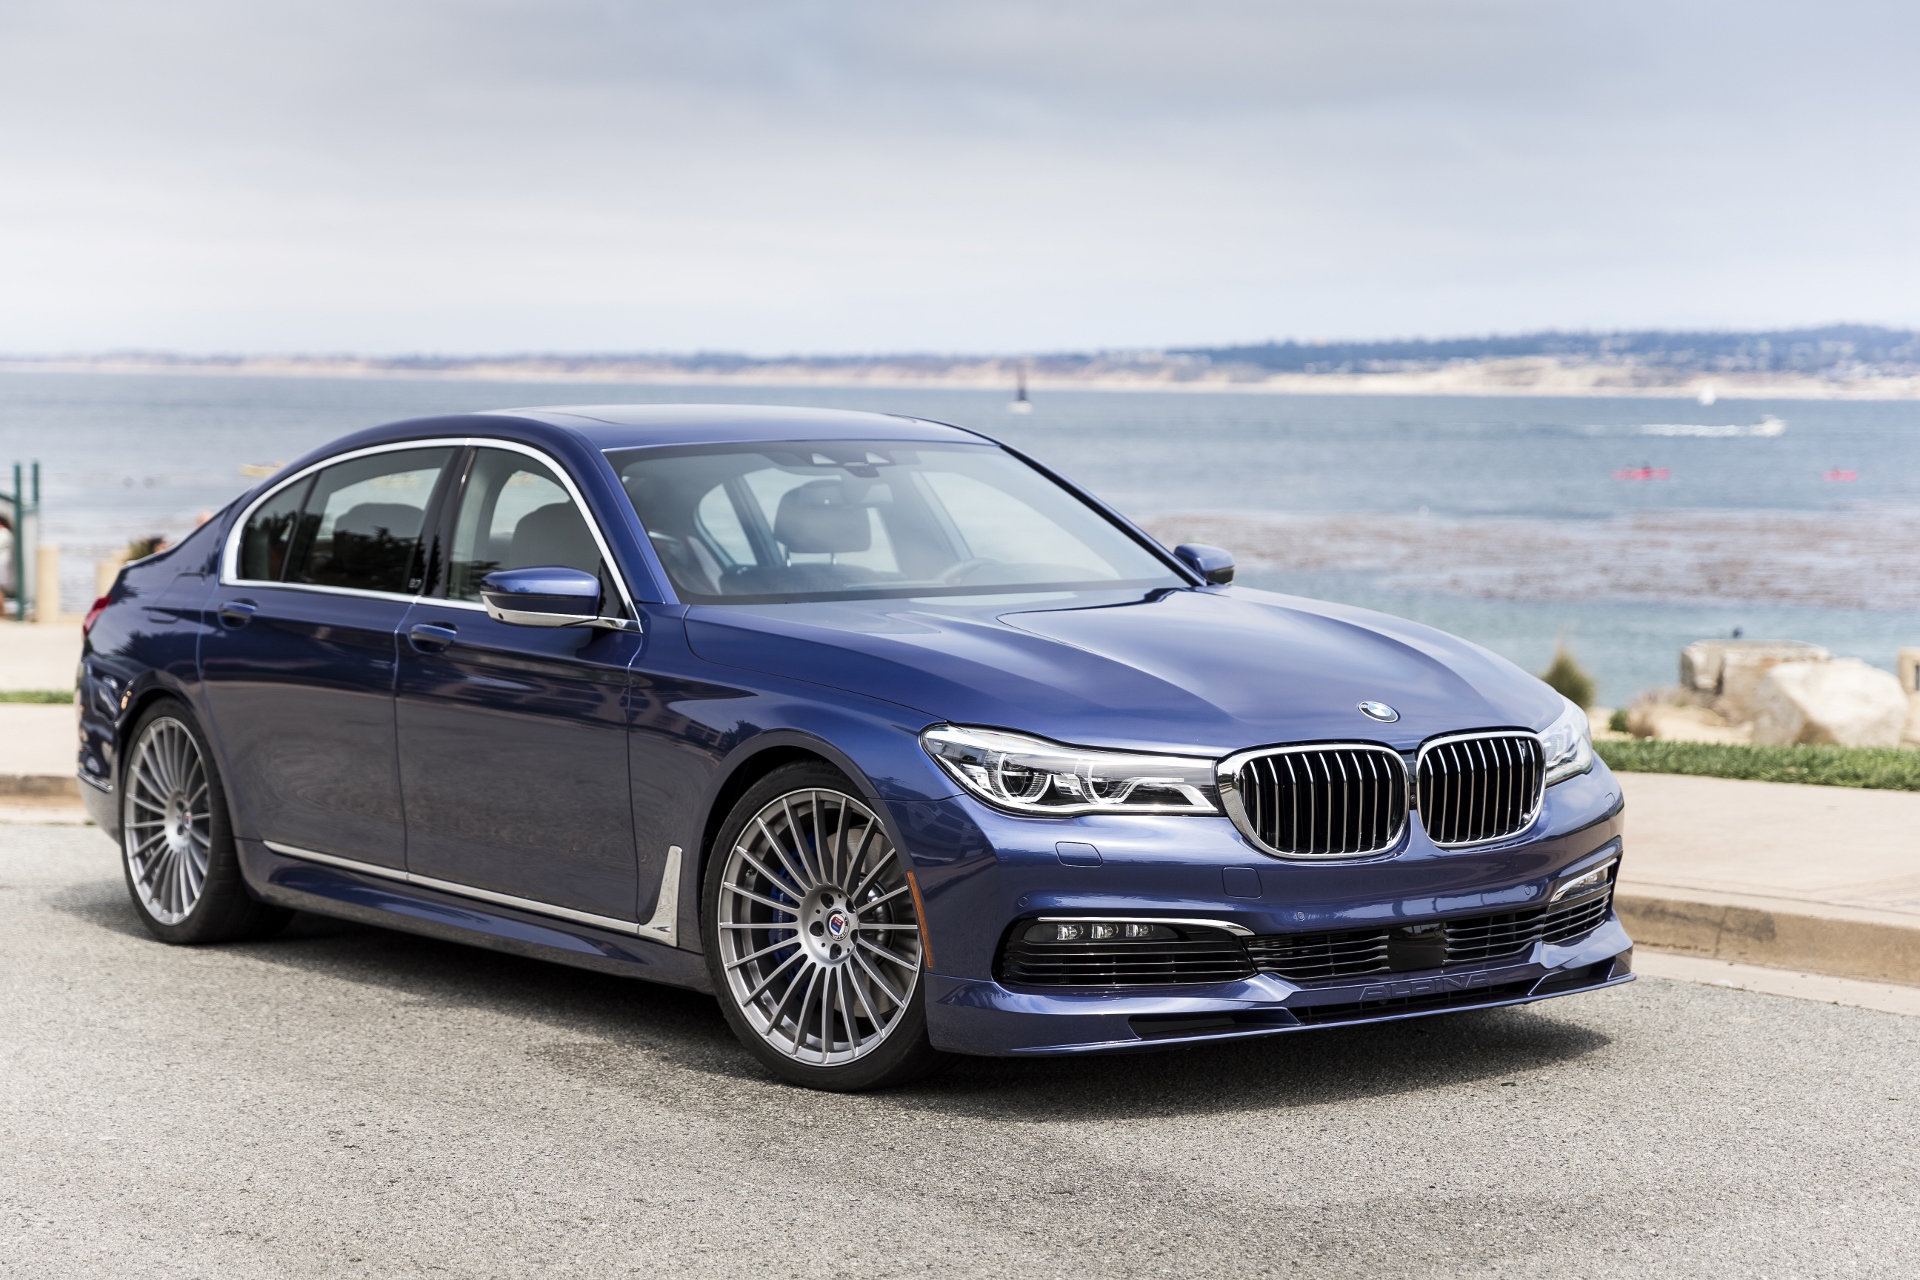 2017 BMW M760i priced from $154,795, Alpina B7 from $137,995